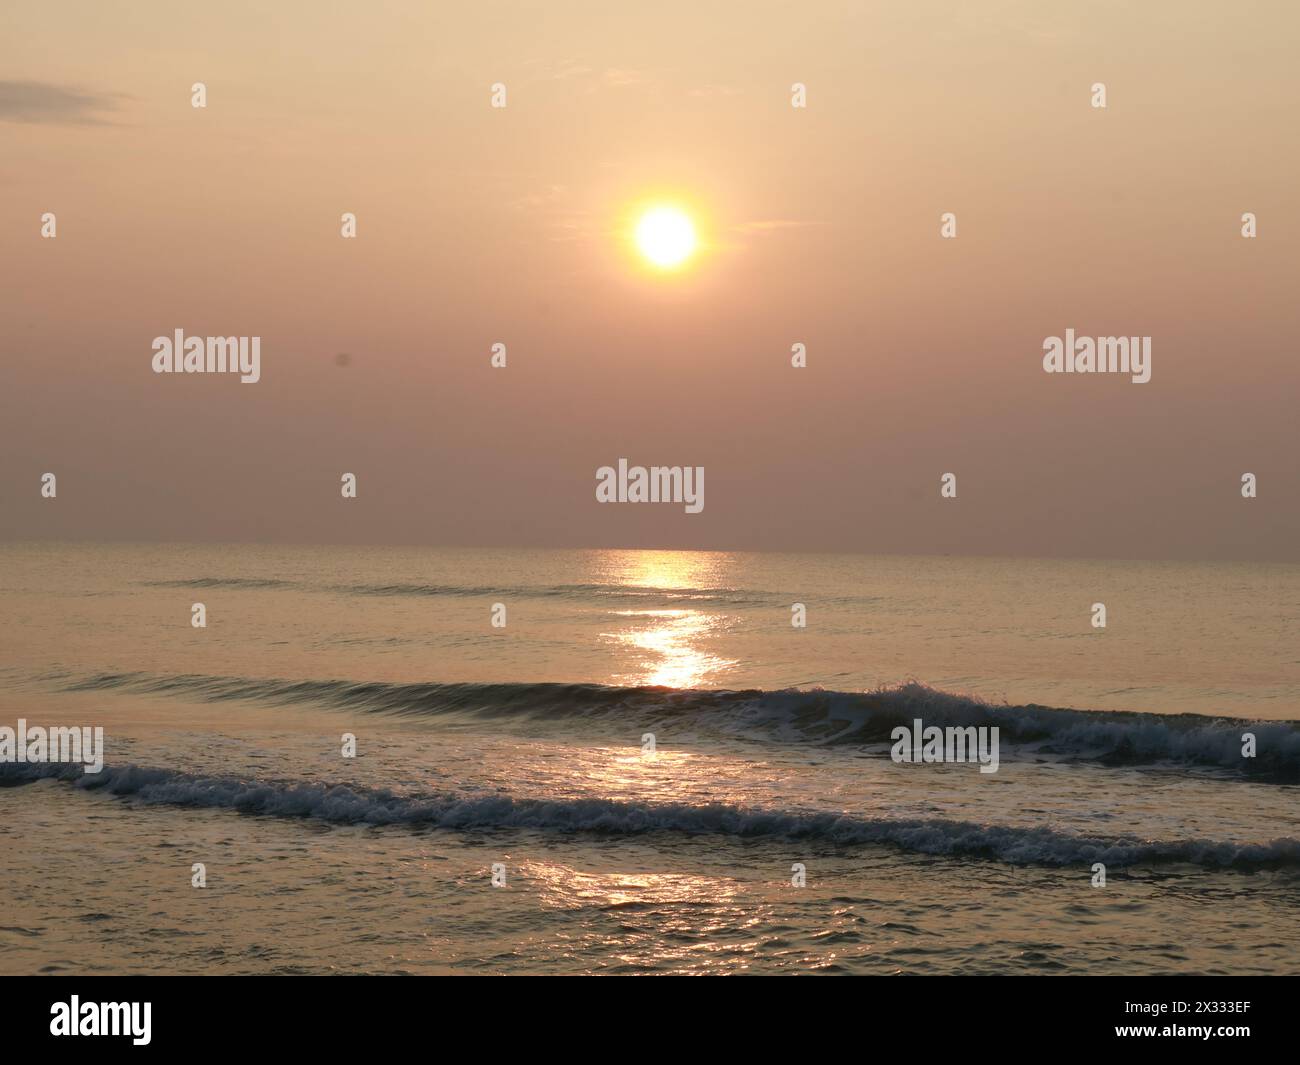 Sun rise over the peaceful sea in the early morning, Hua Hin, Thailand Stock Photo